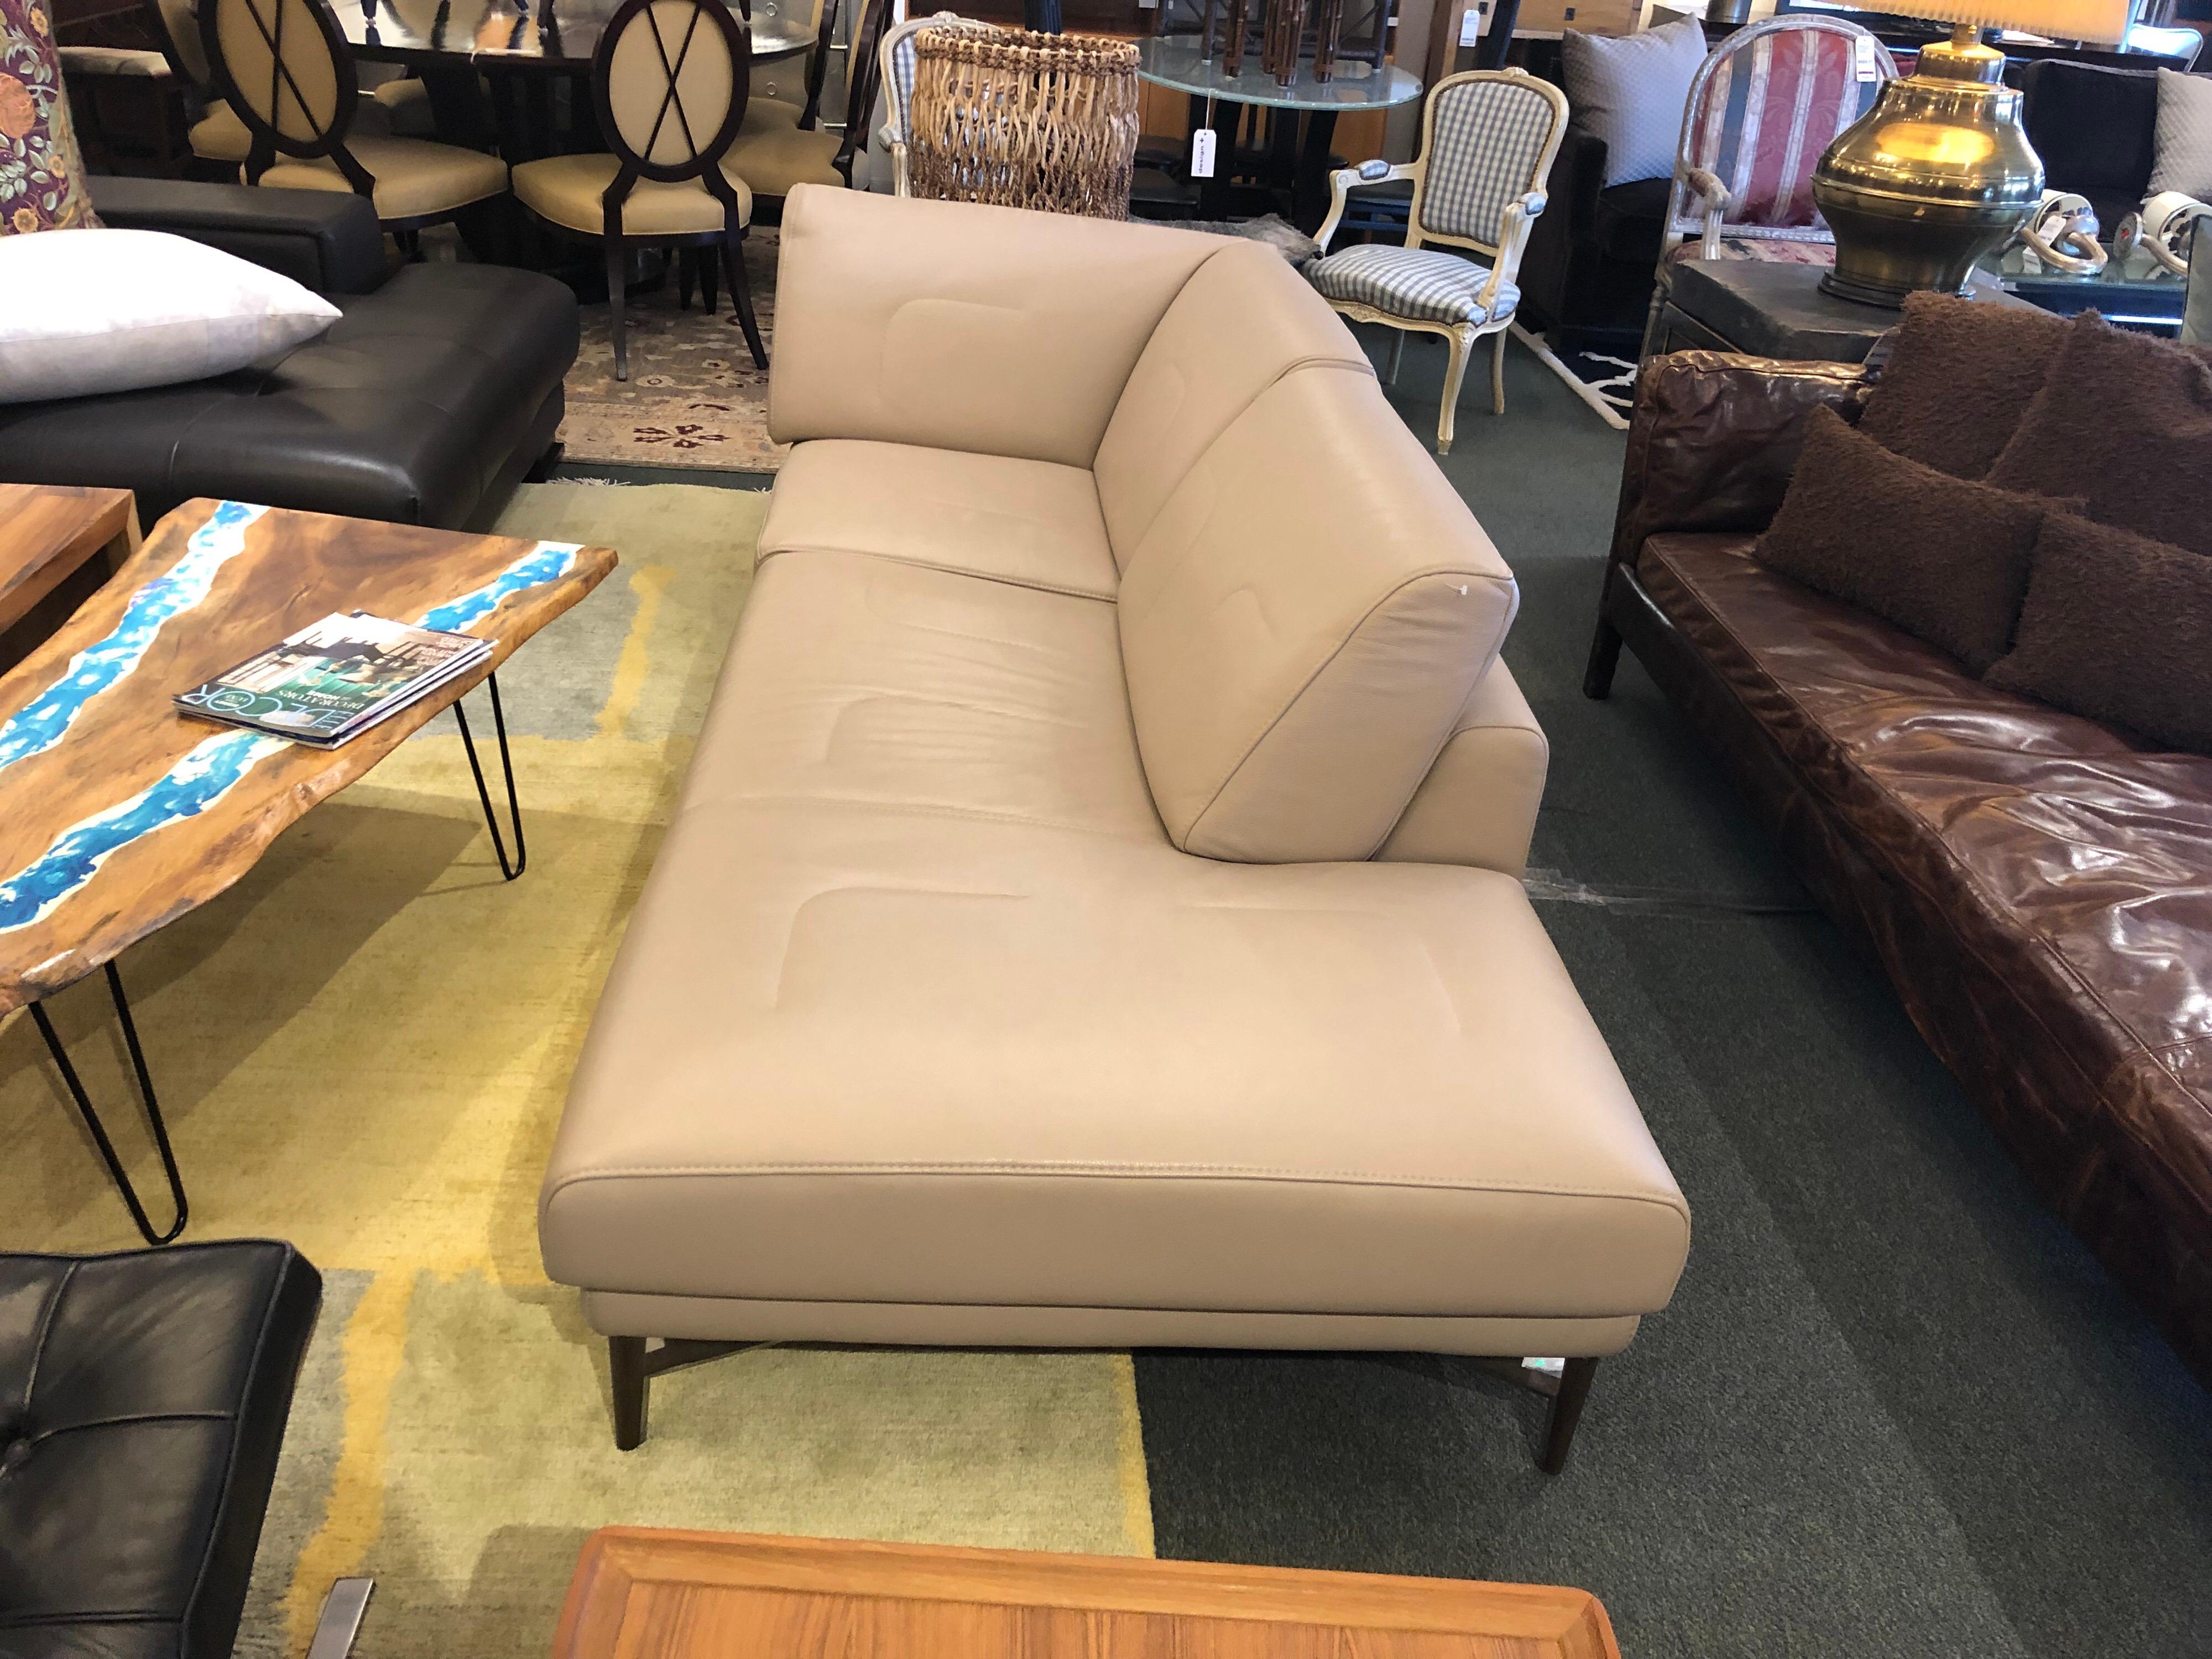 It presents contemporary Utopic chaise sofa from Roche Bobois. This beautiful couch is upholstered in a beige color high quality, soft leather. Beautiful, comfortable and quality that will last for many years to come. Perfect for any